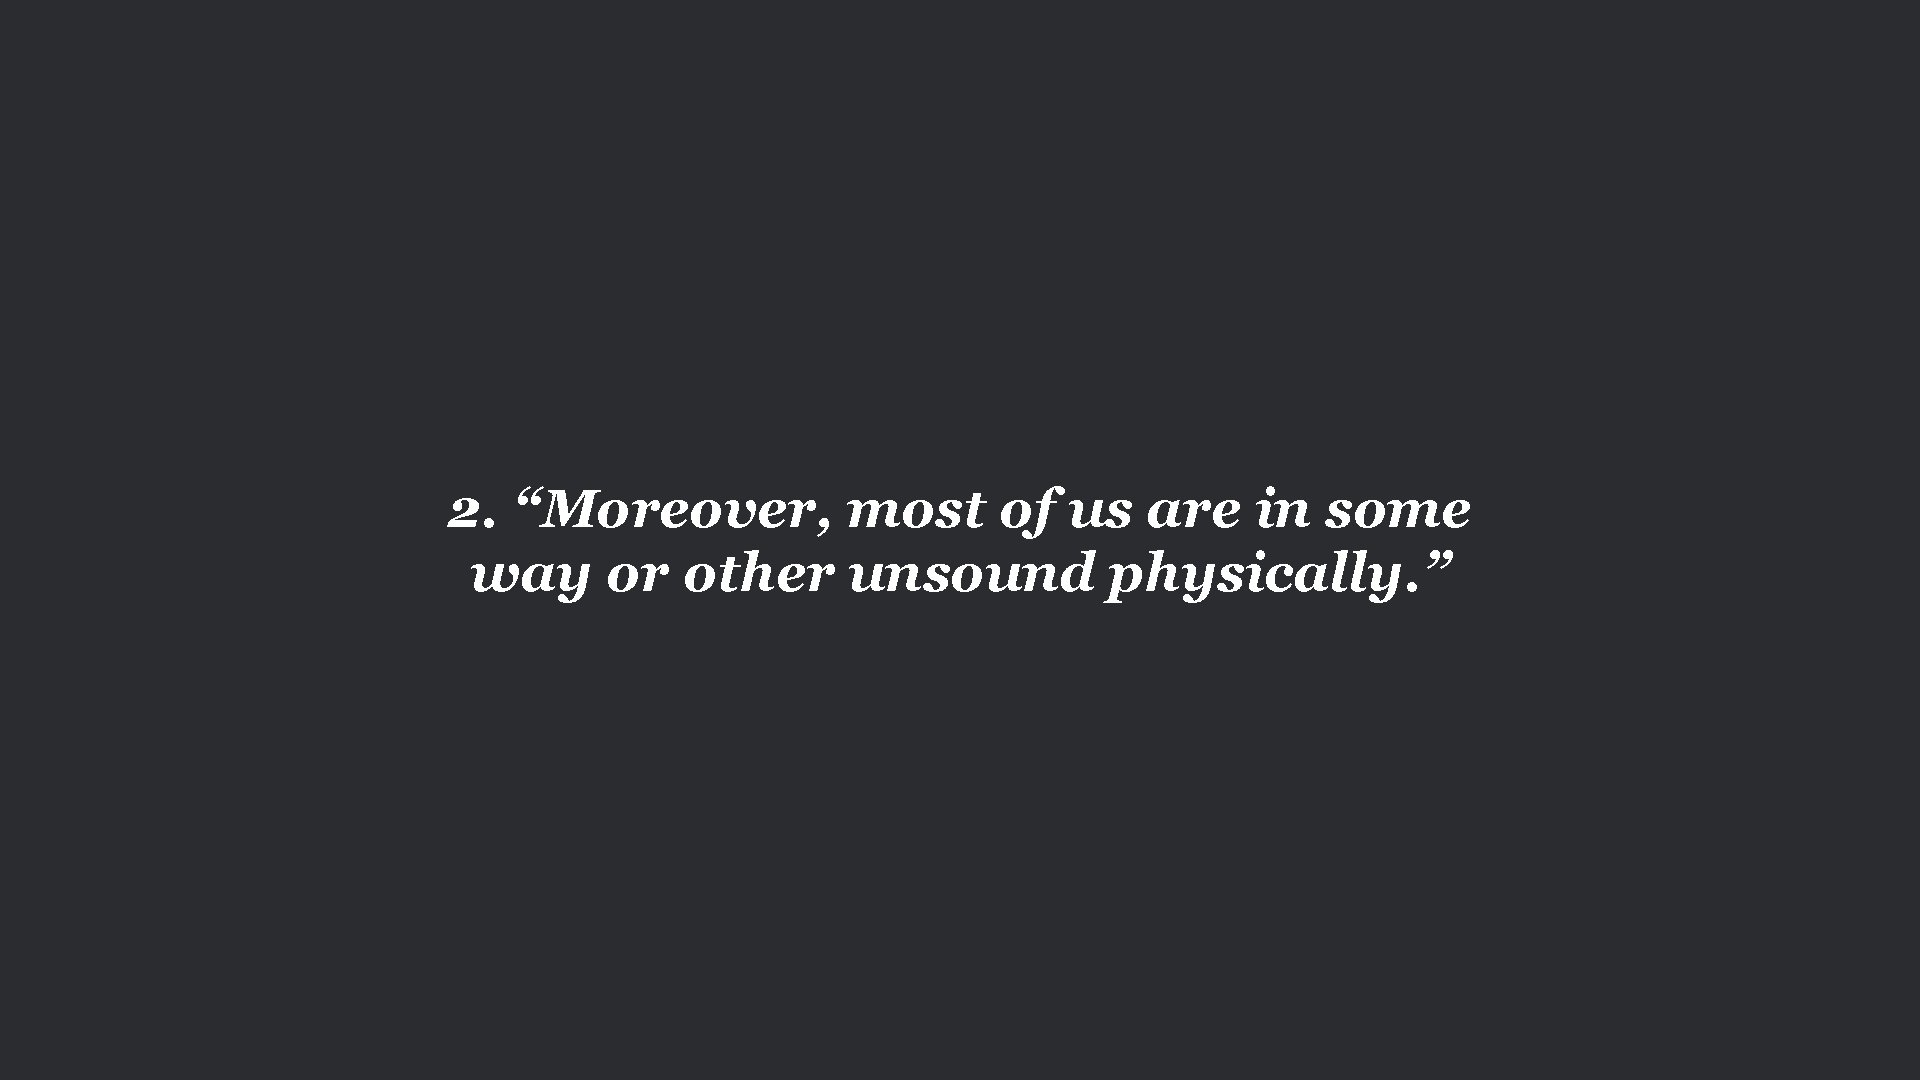 2. “Moreover, most of us are in some way or other unsound physically. ”